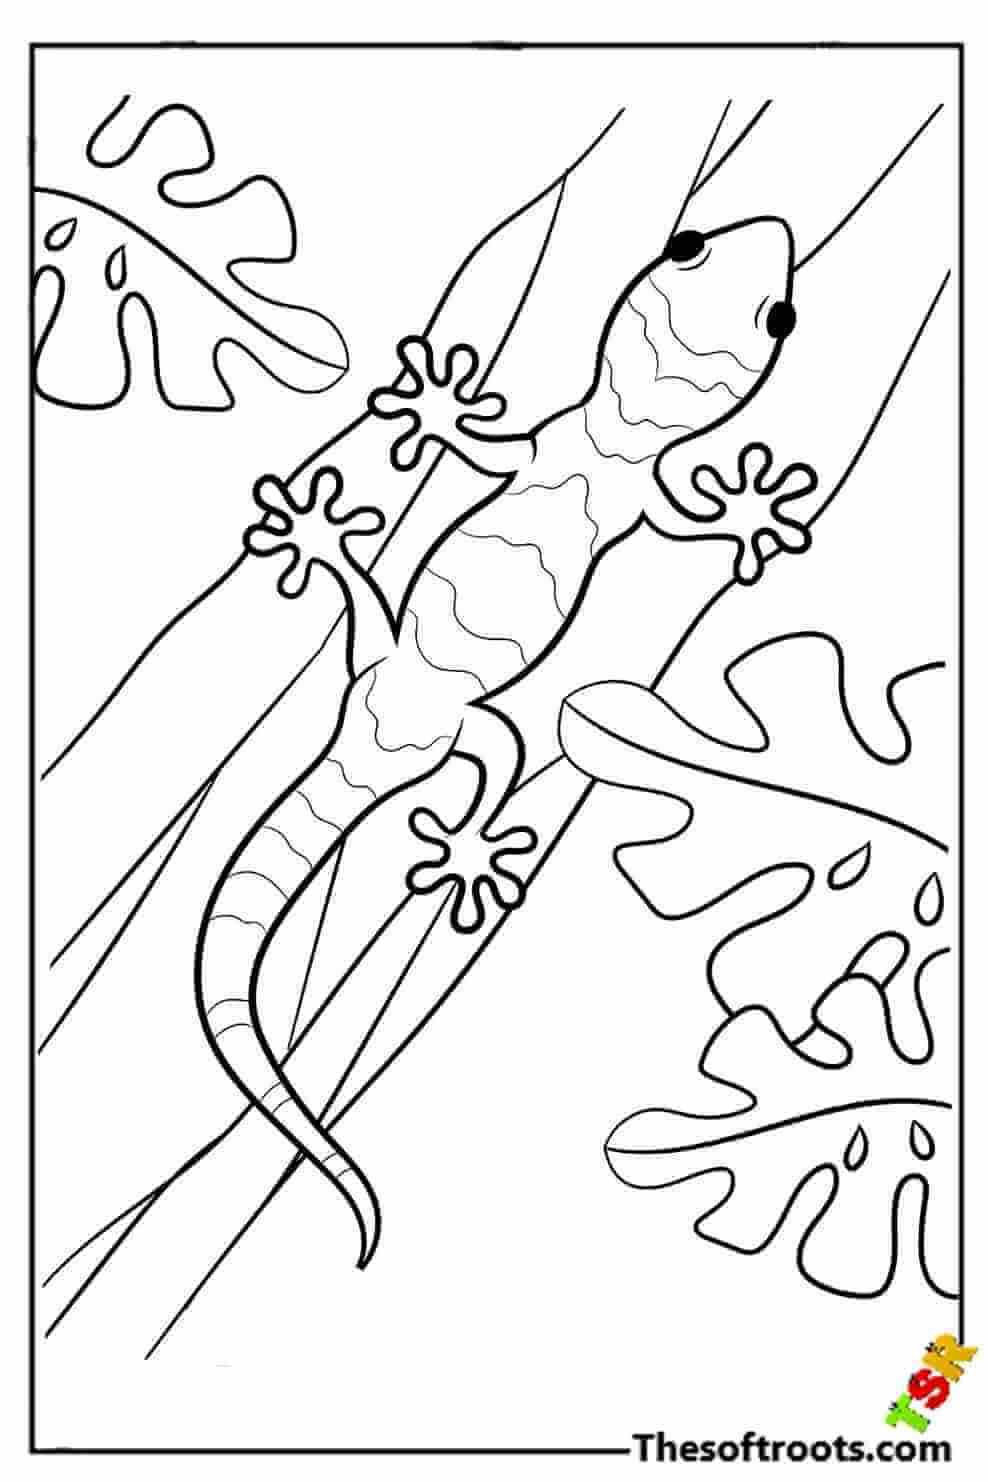 Lizard in the jungle coloring pages